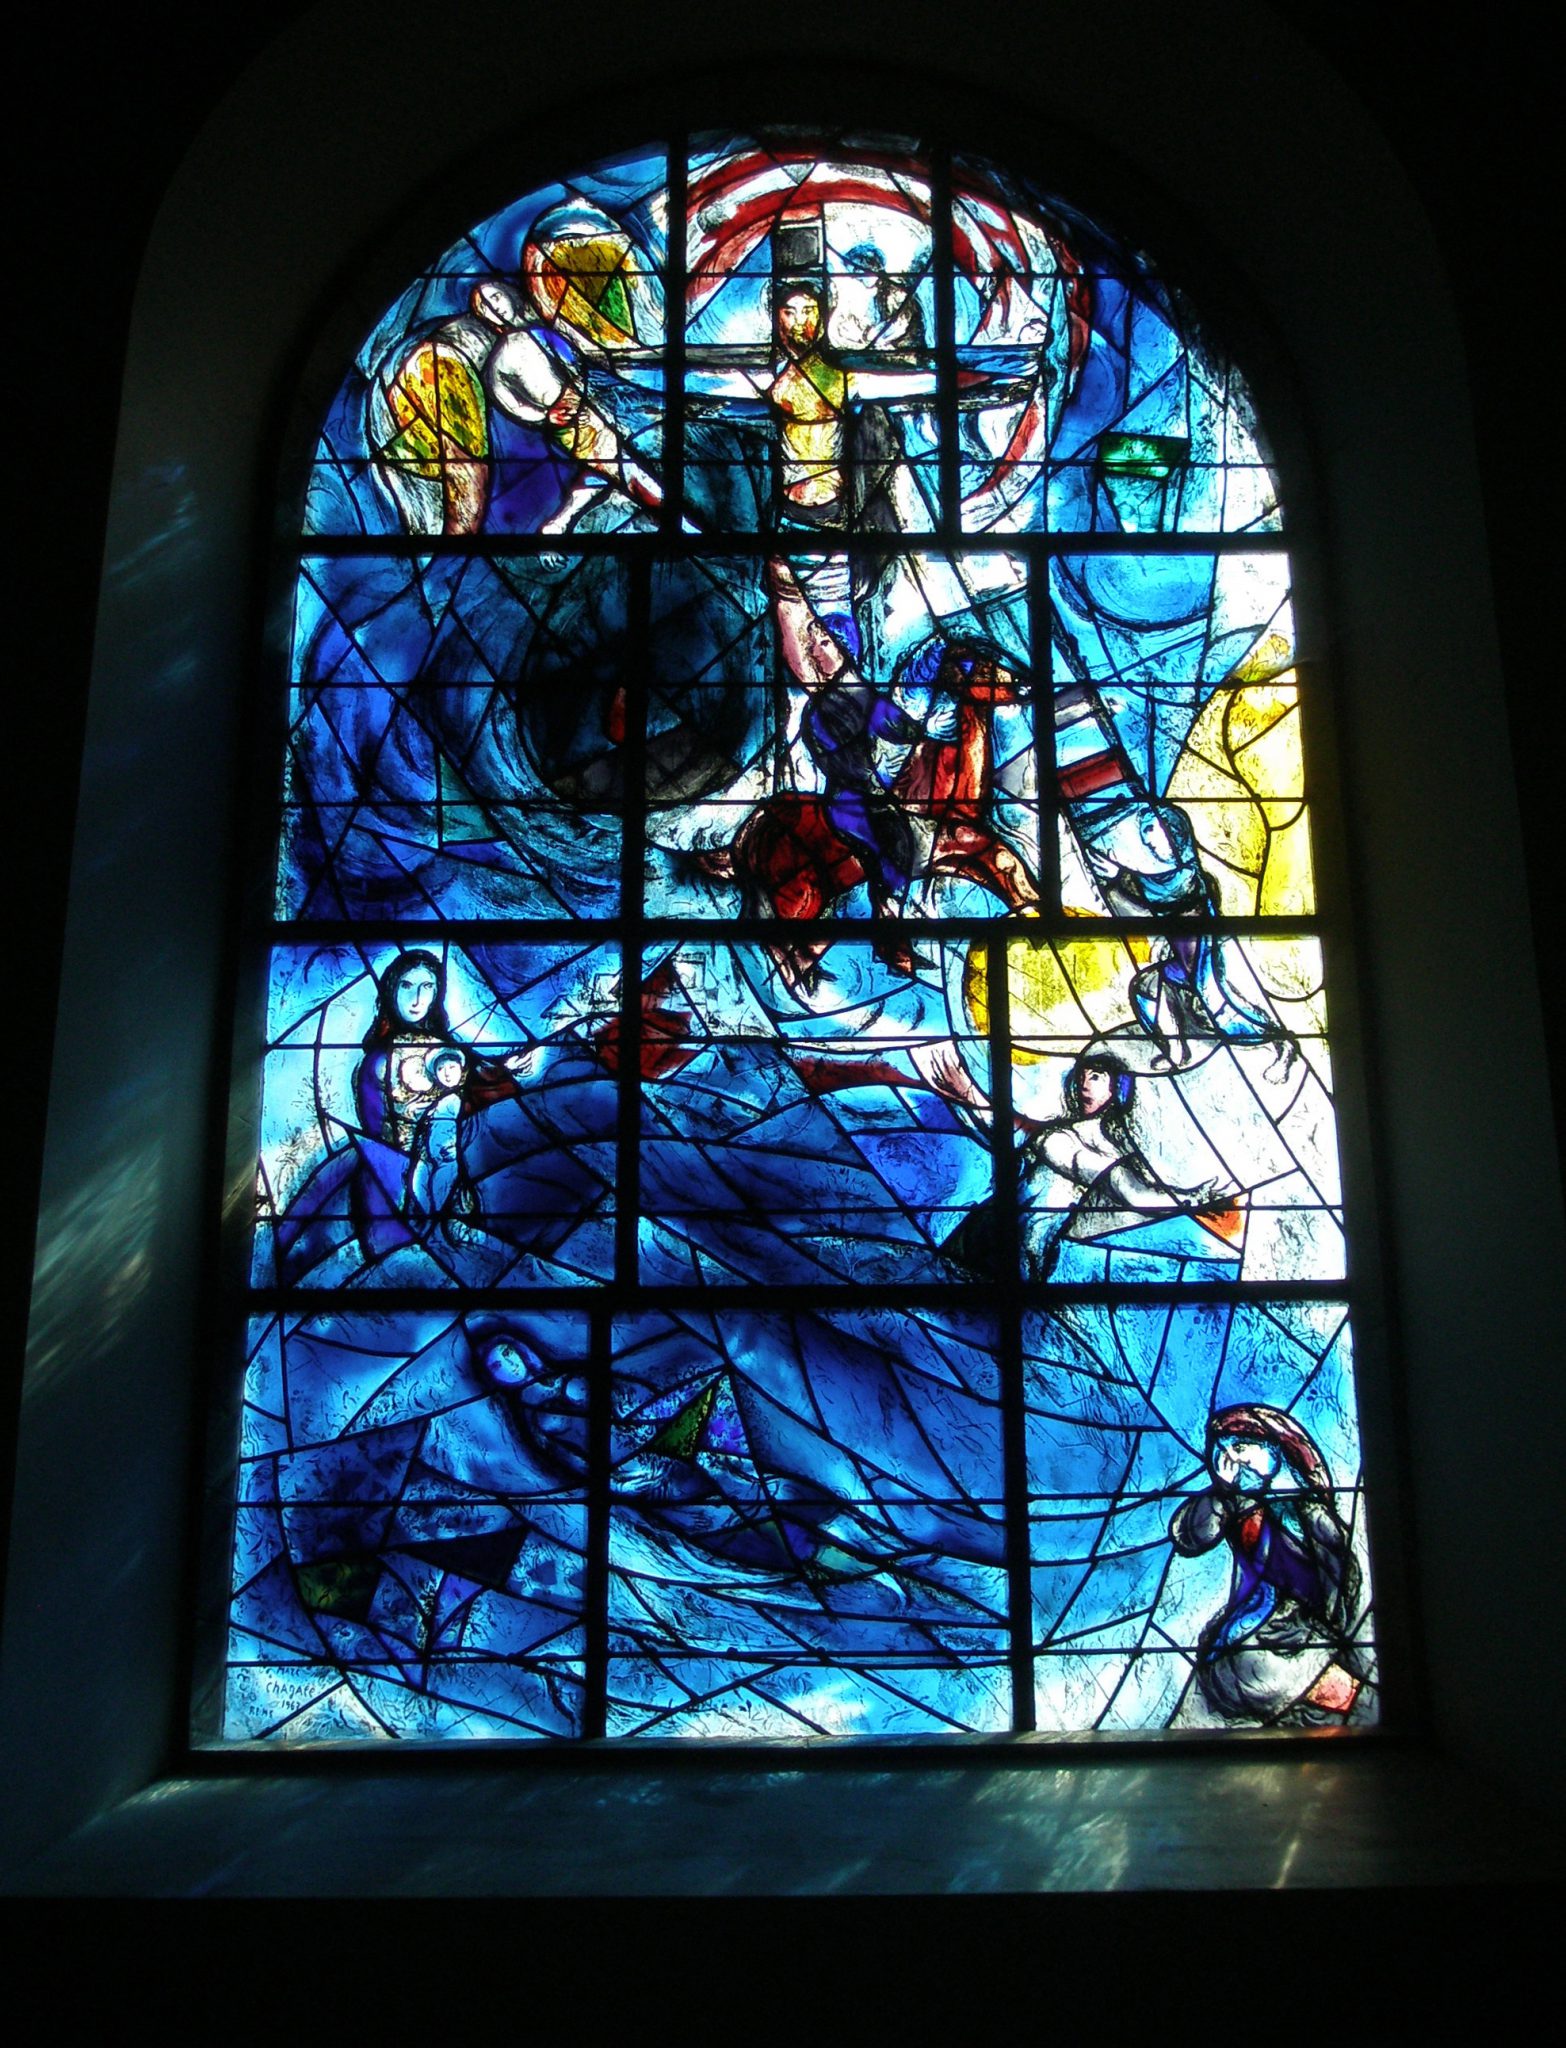 Chagall's Memorial Window, at All Saints Church, in Tudeley. The blue-ish light that's reflected against the walls around the lower portions of the window seems to splash real sea-spray into the air.